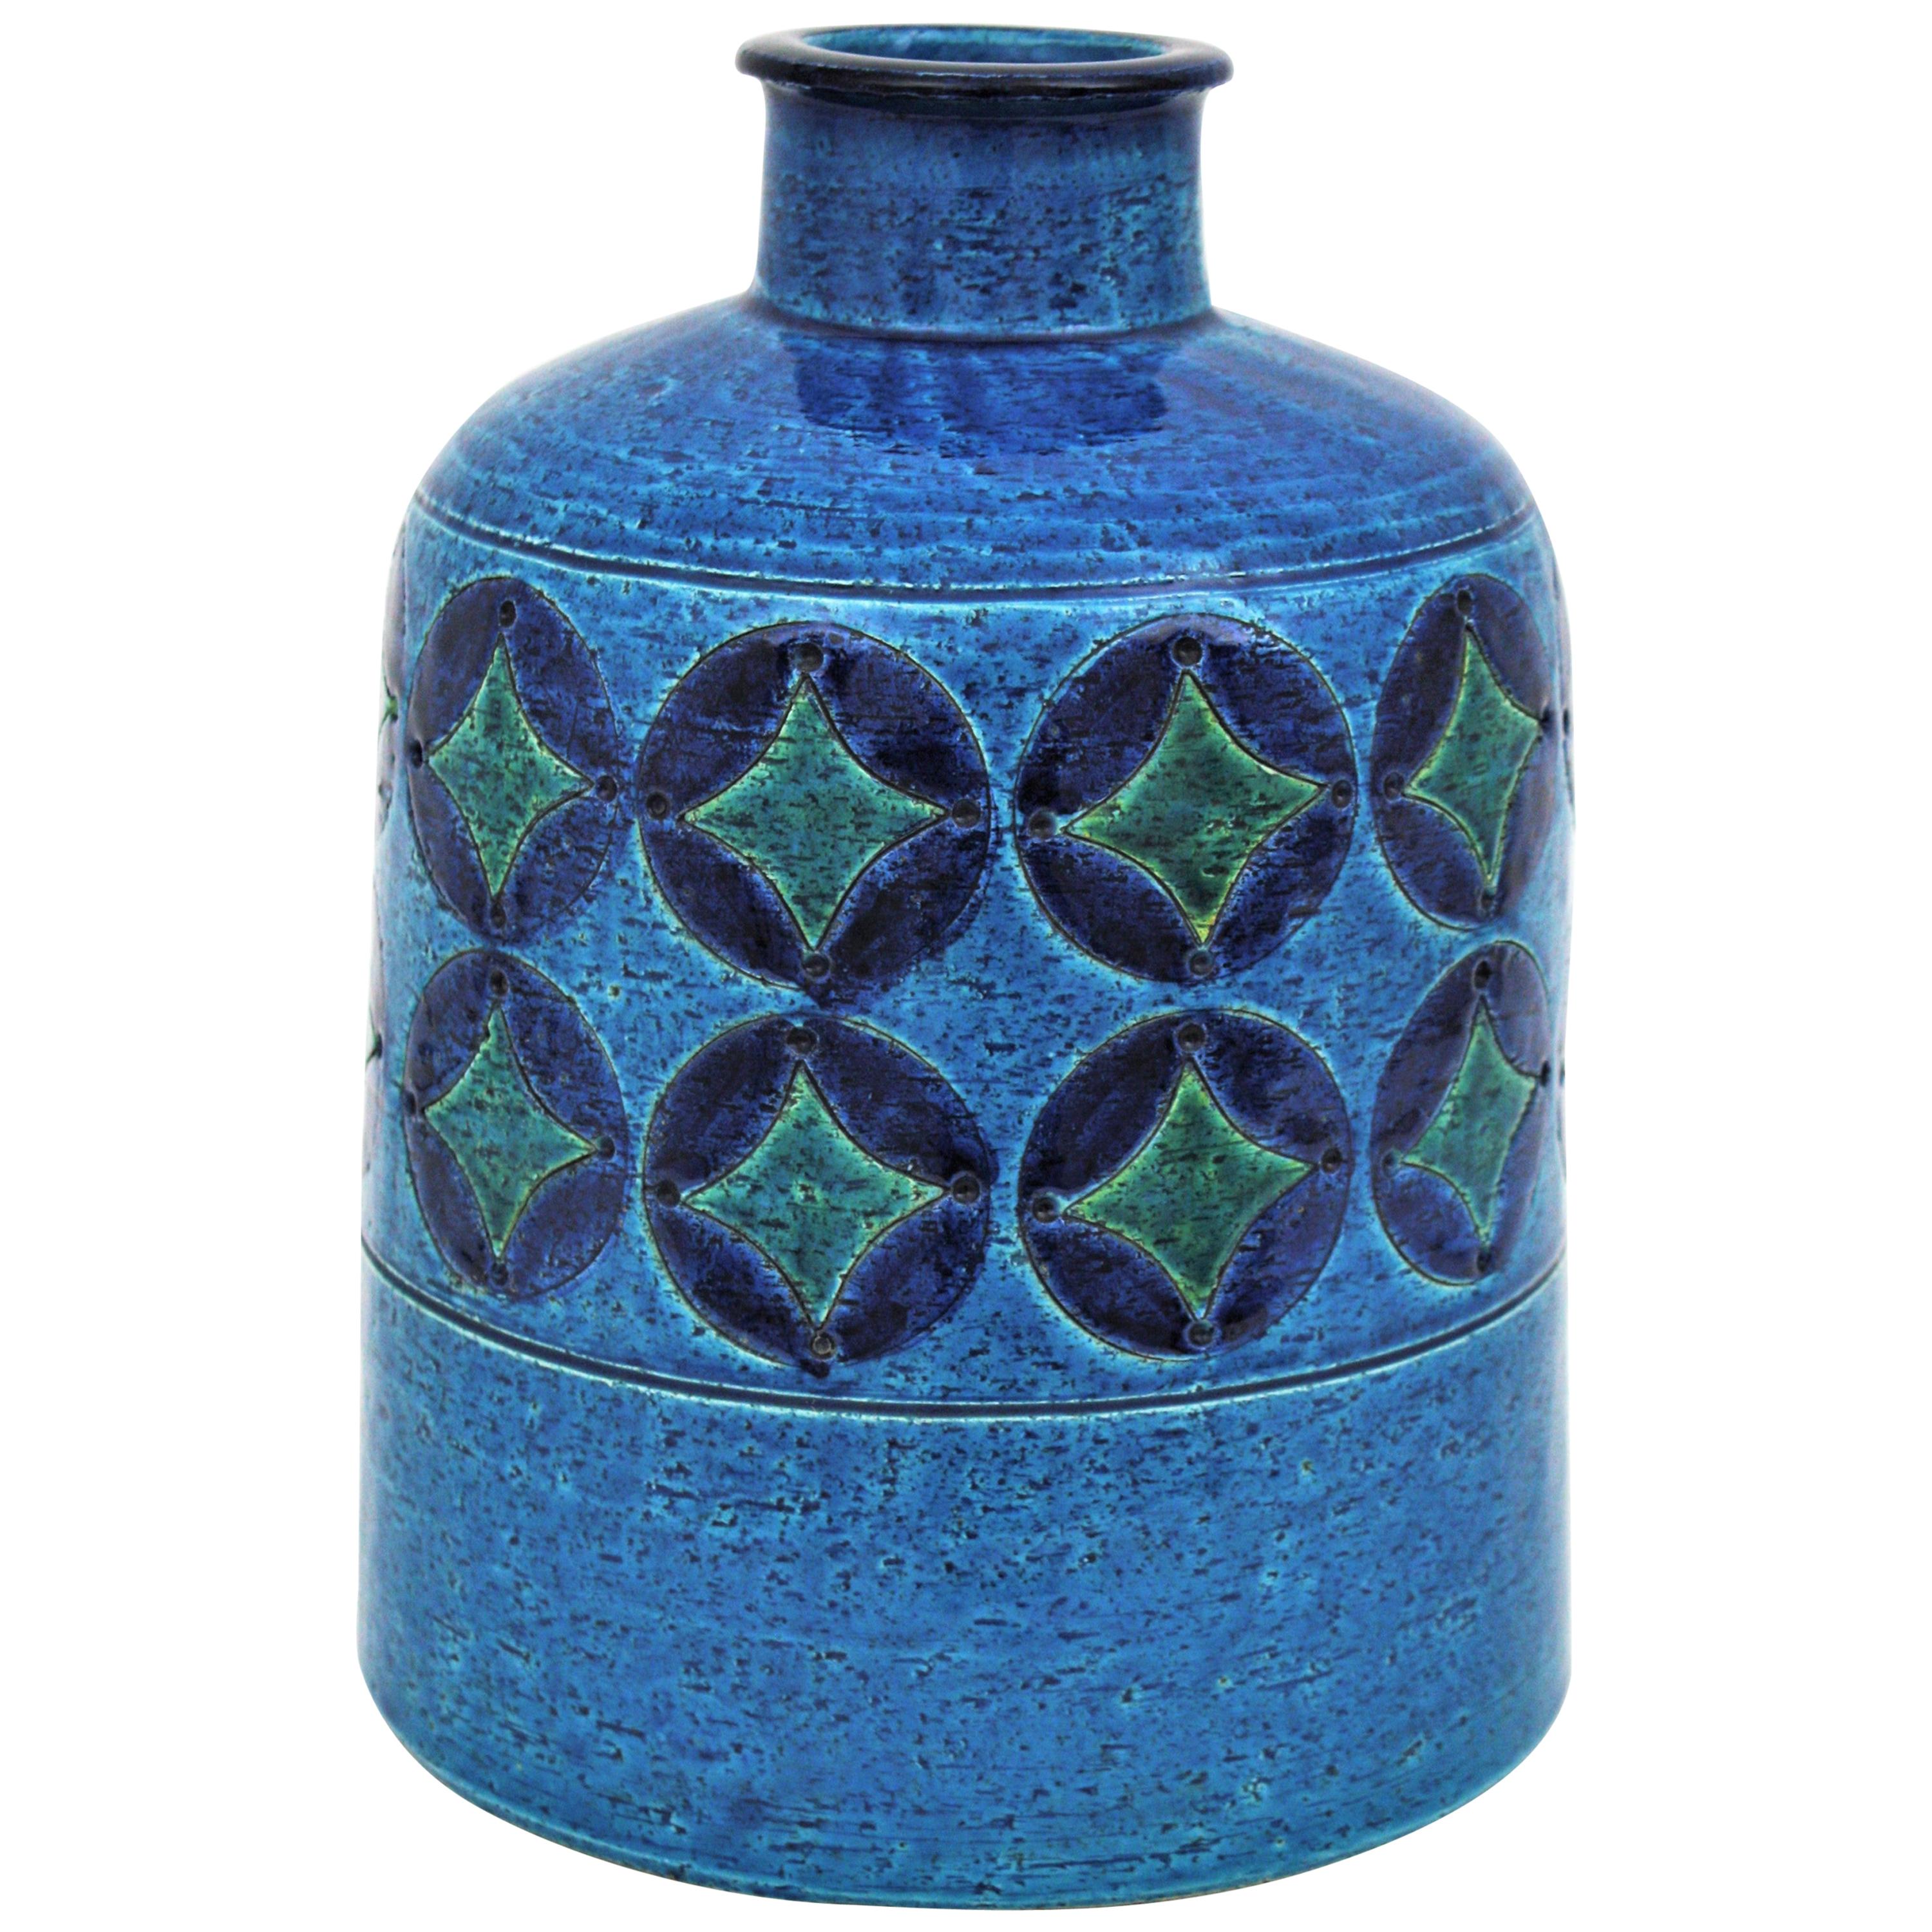 Bitossi Aldo Londi Blue Ceramic Large Bottle Vase with Circles & Rhombus Pattern In Excellent Condition For Sale In Barcelona, ES